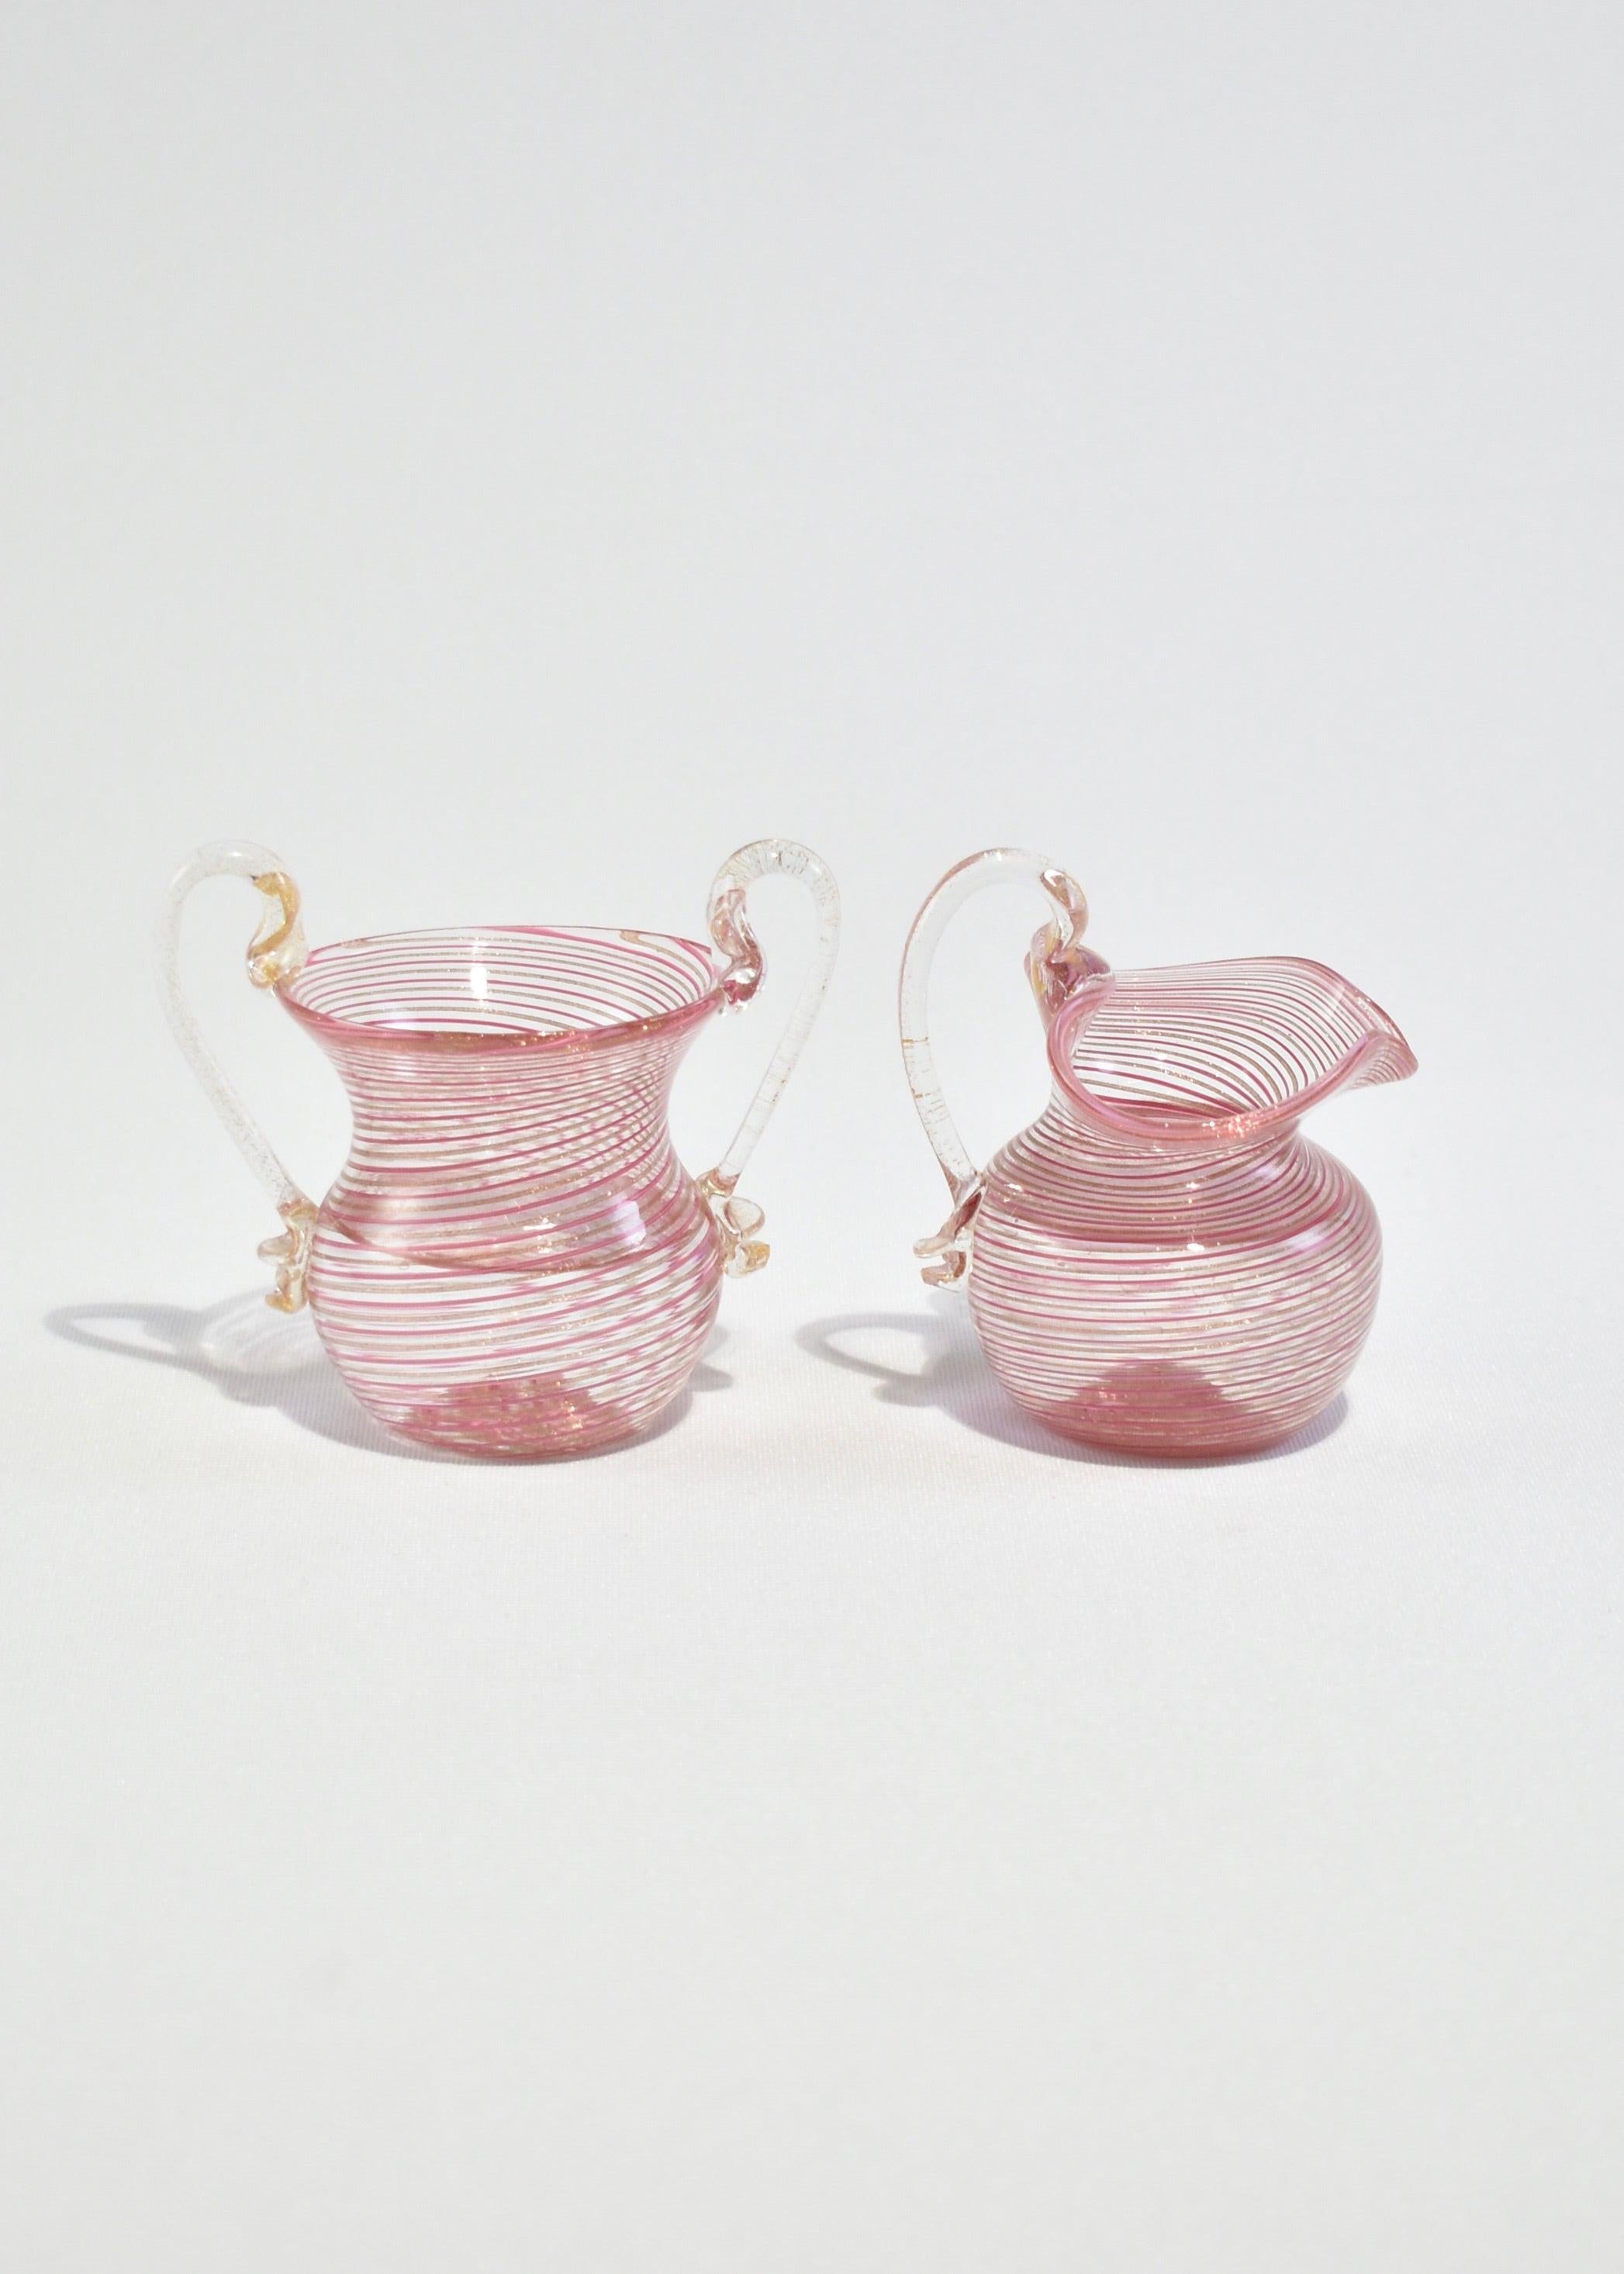 Beautiful vintage blown glass cream and sugar set with pink stripe and gold fleck detail. Made in Italy.